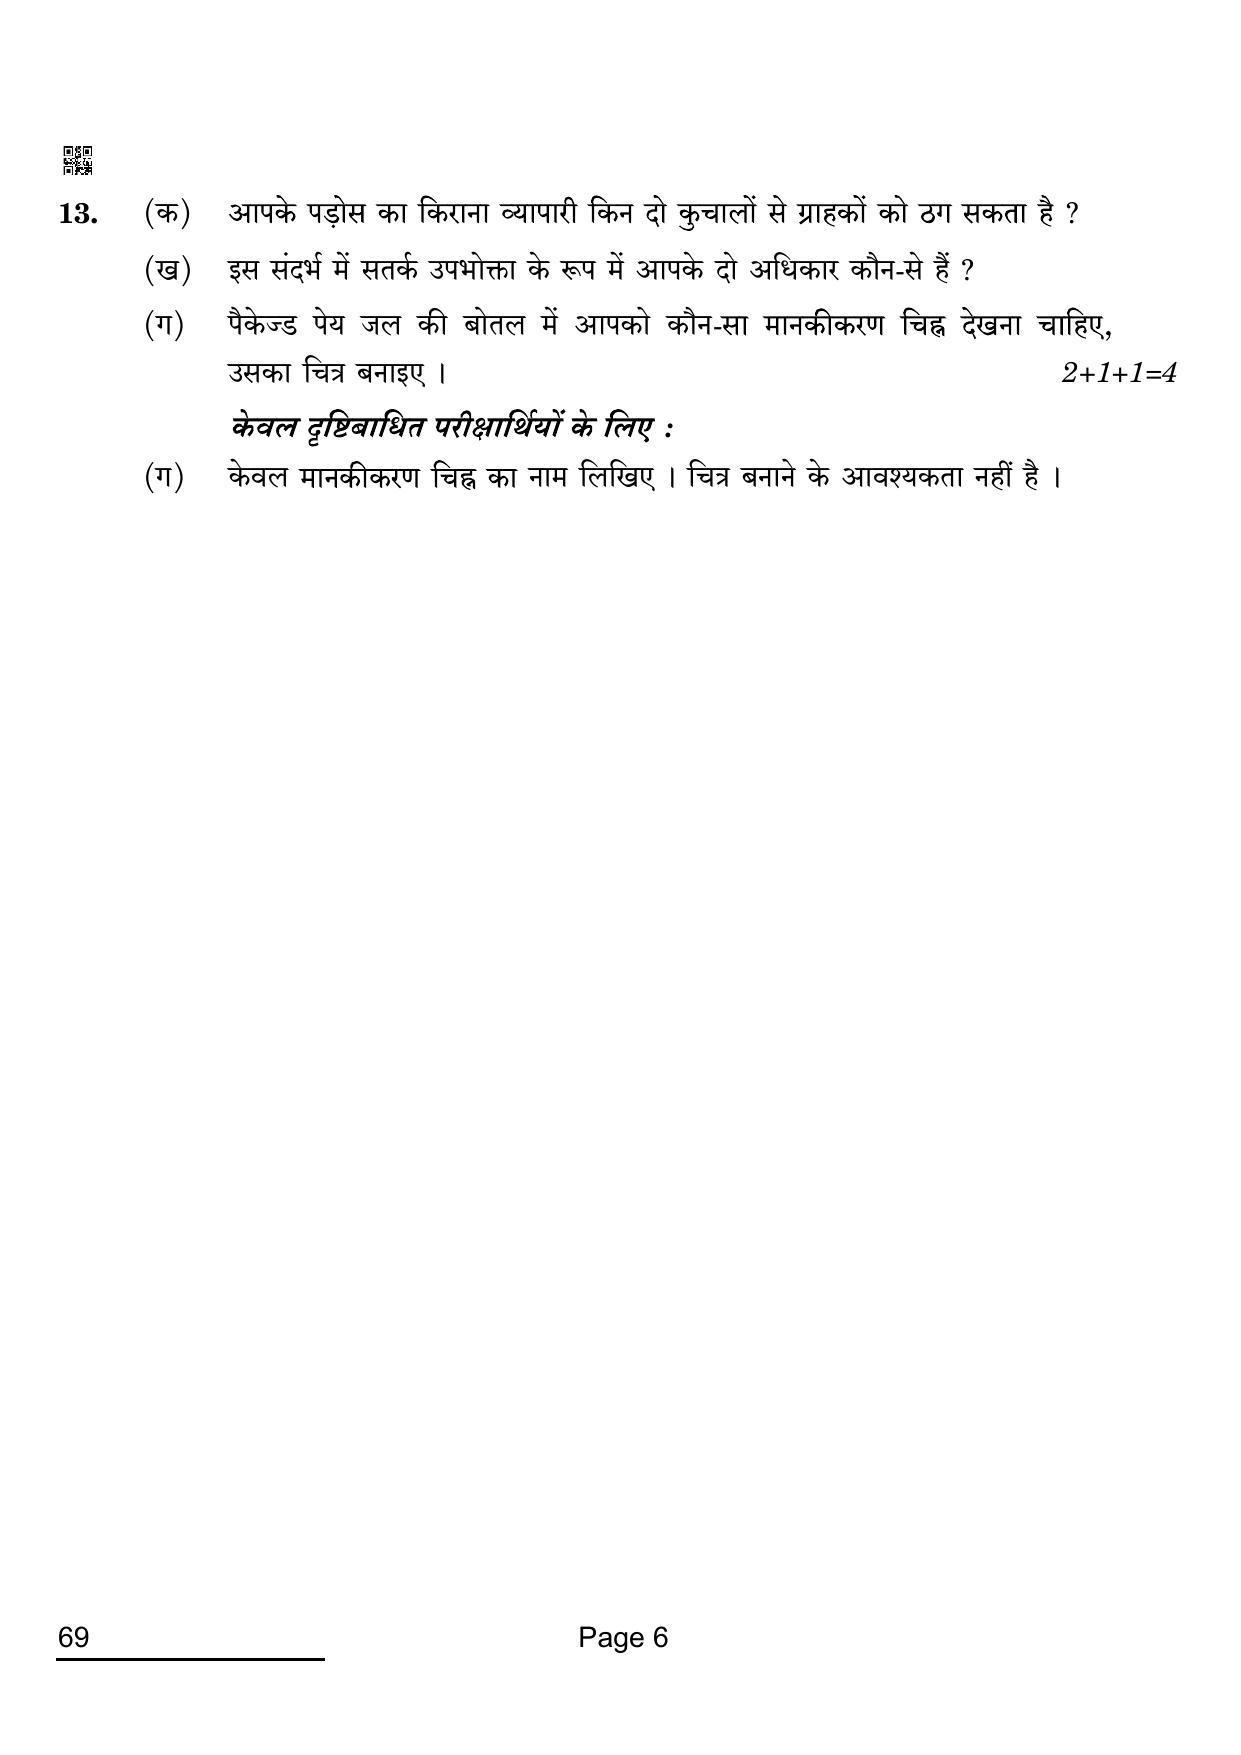 CBSE Class 12 69_Home Science 2022 Question Paper - Page 6